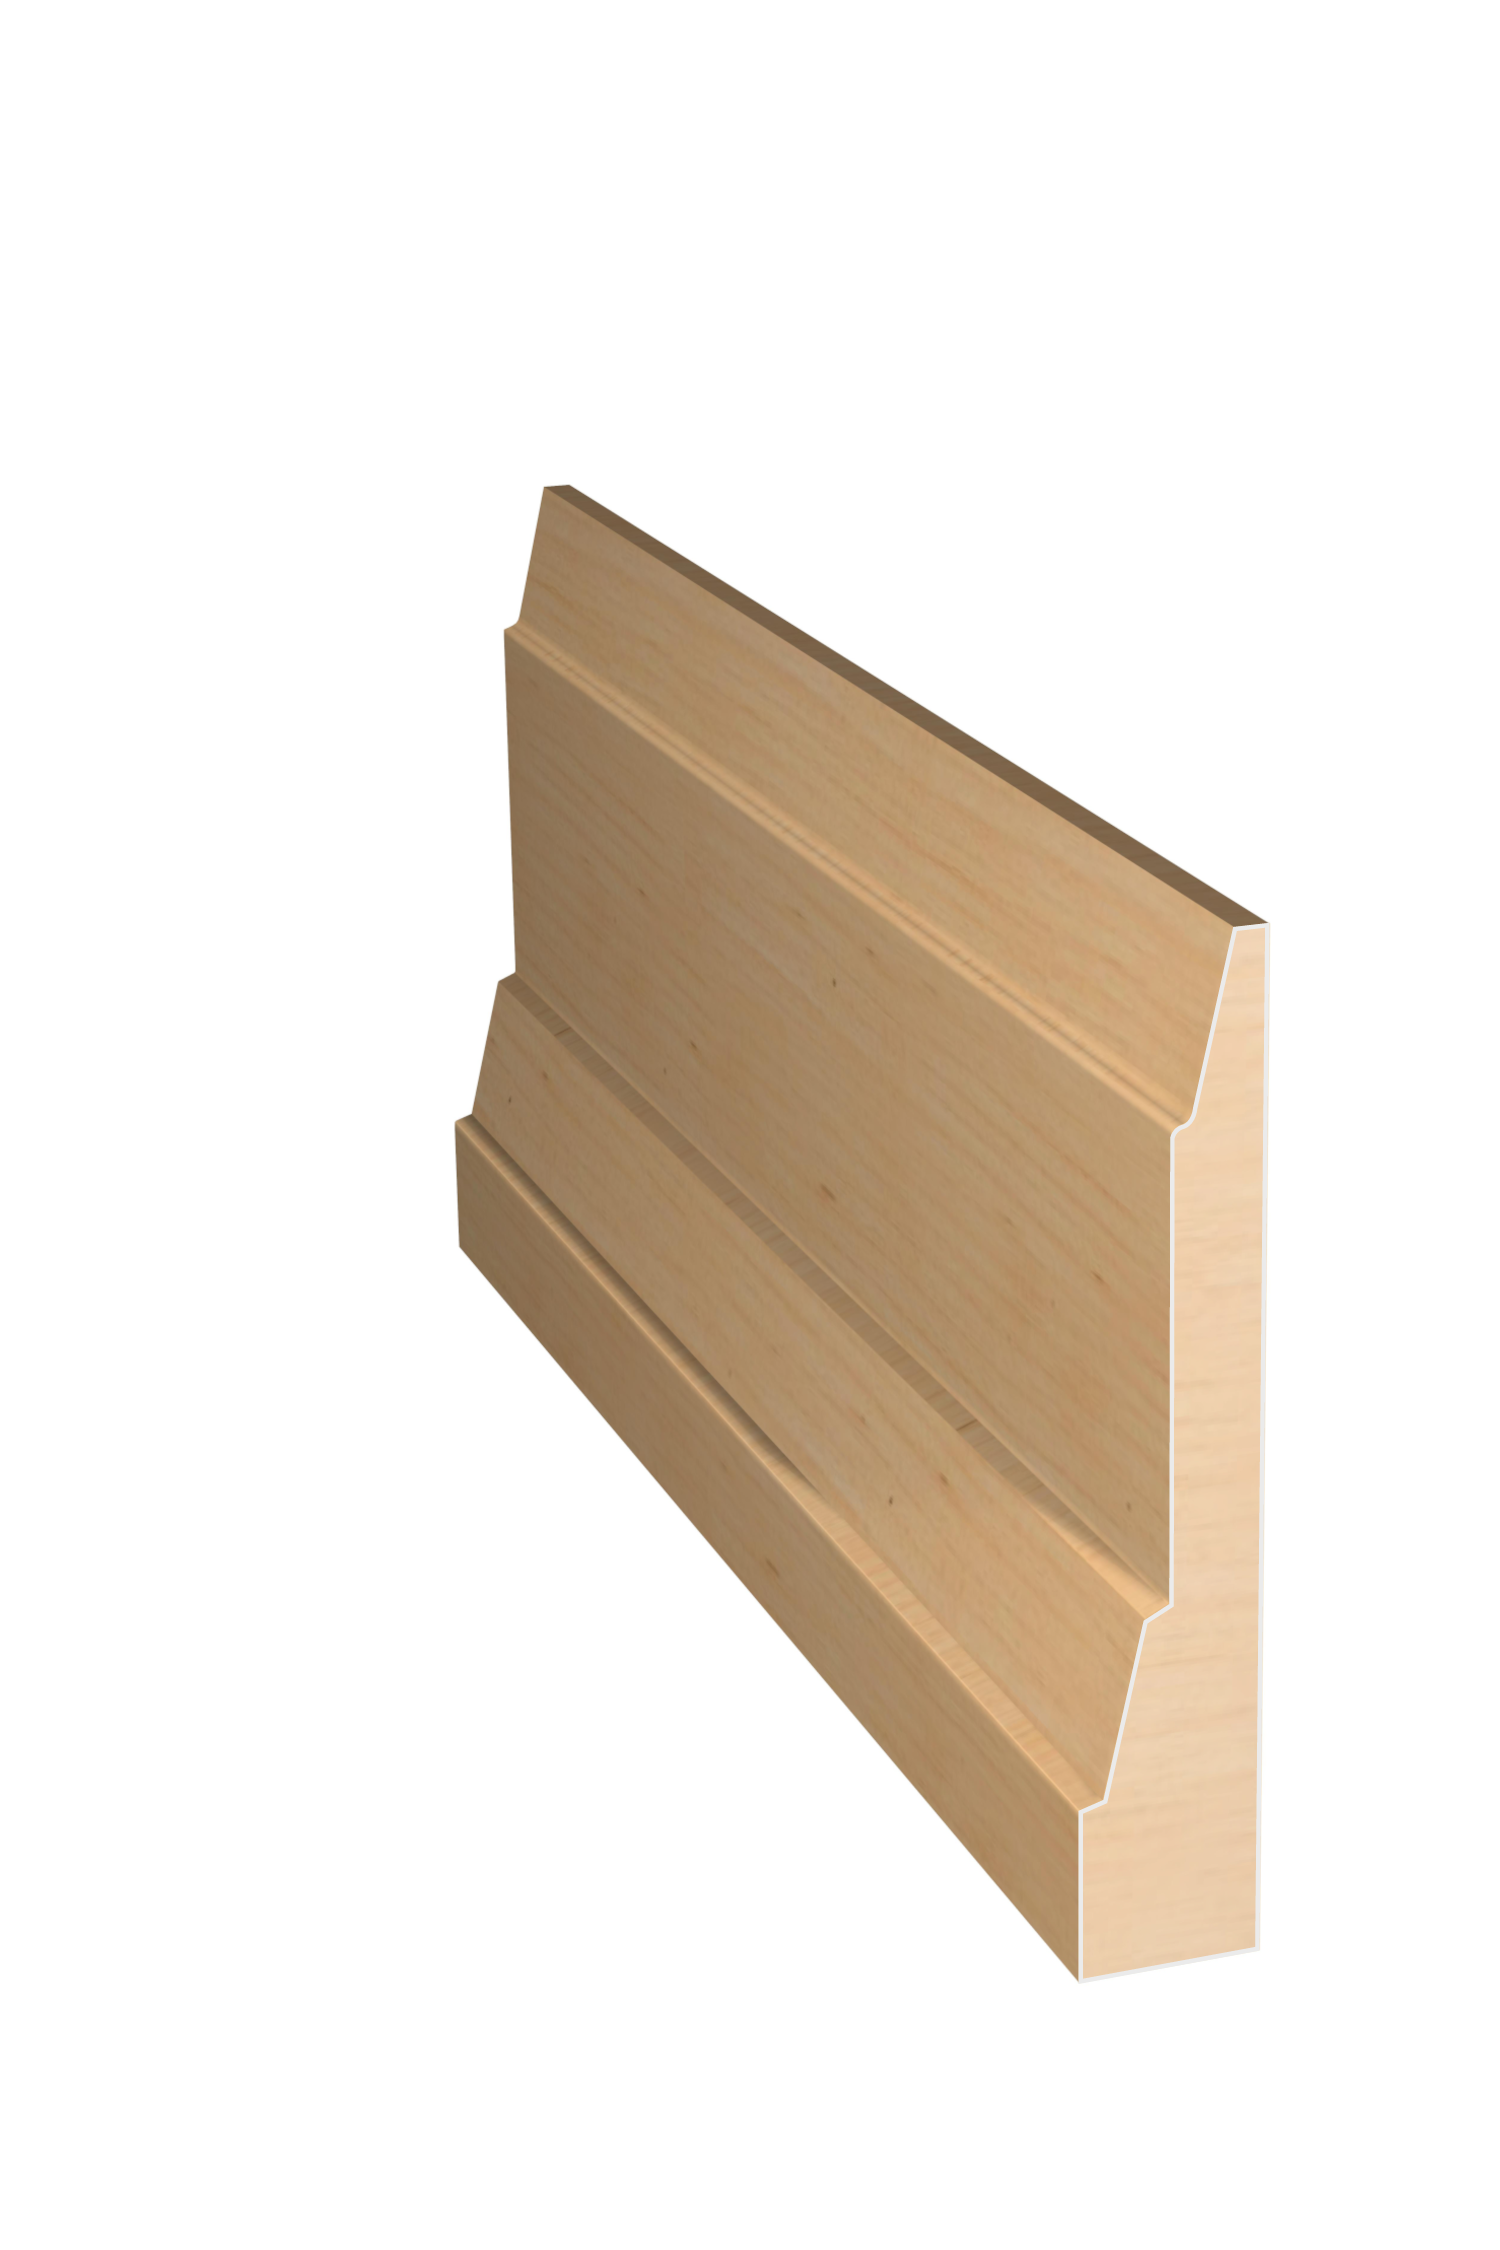 Three dimensional rendering of custom casing wood molding CAPL2349 made by Public Lumber Company in Detroit.